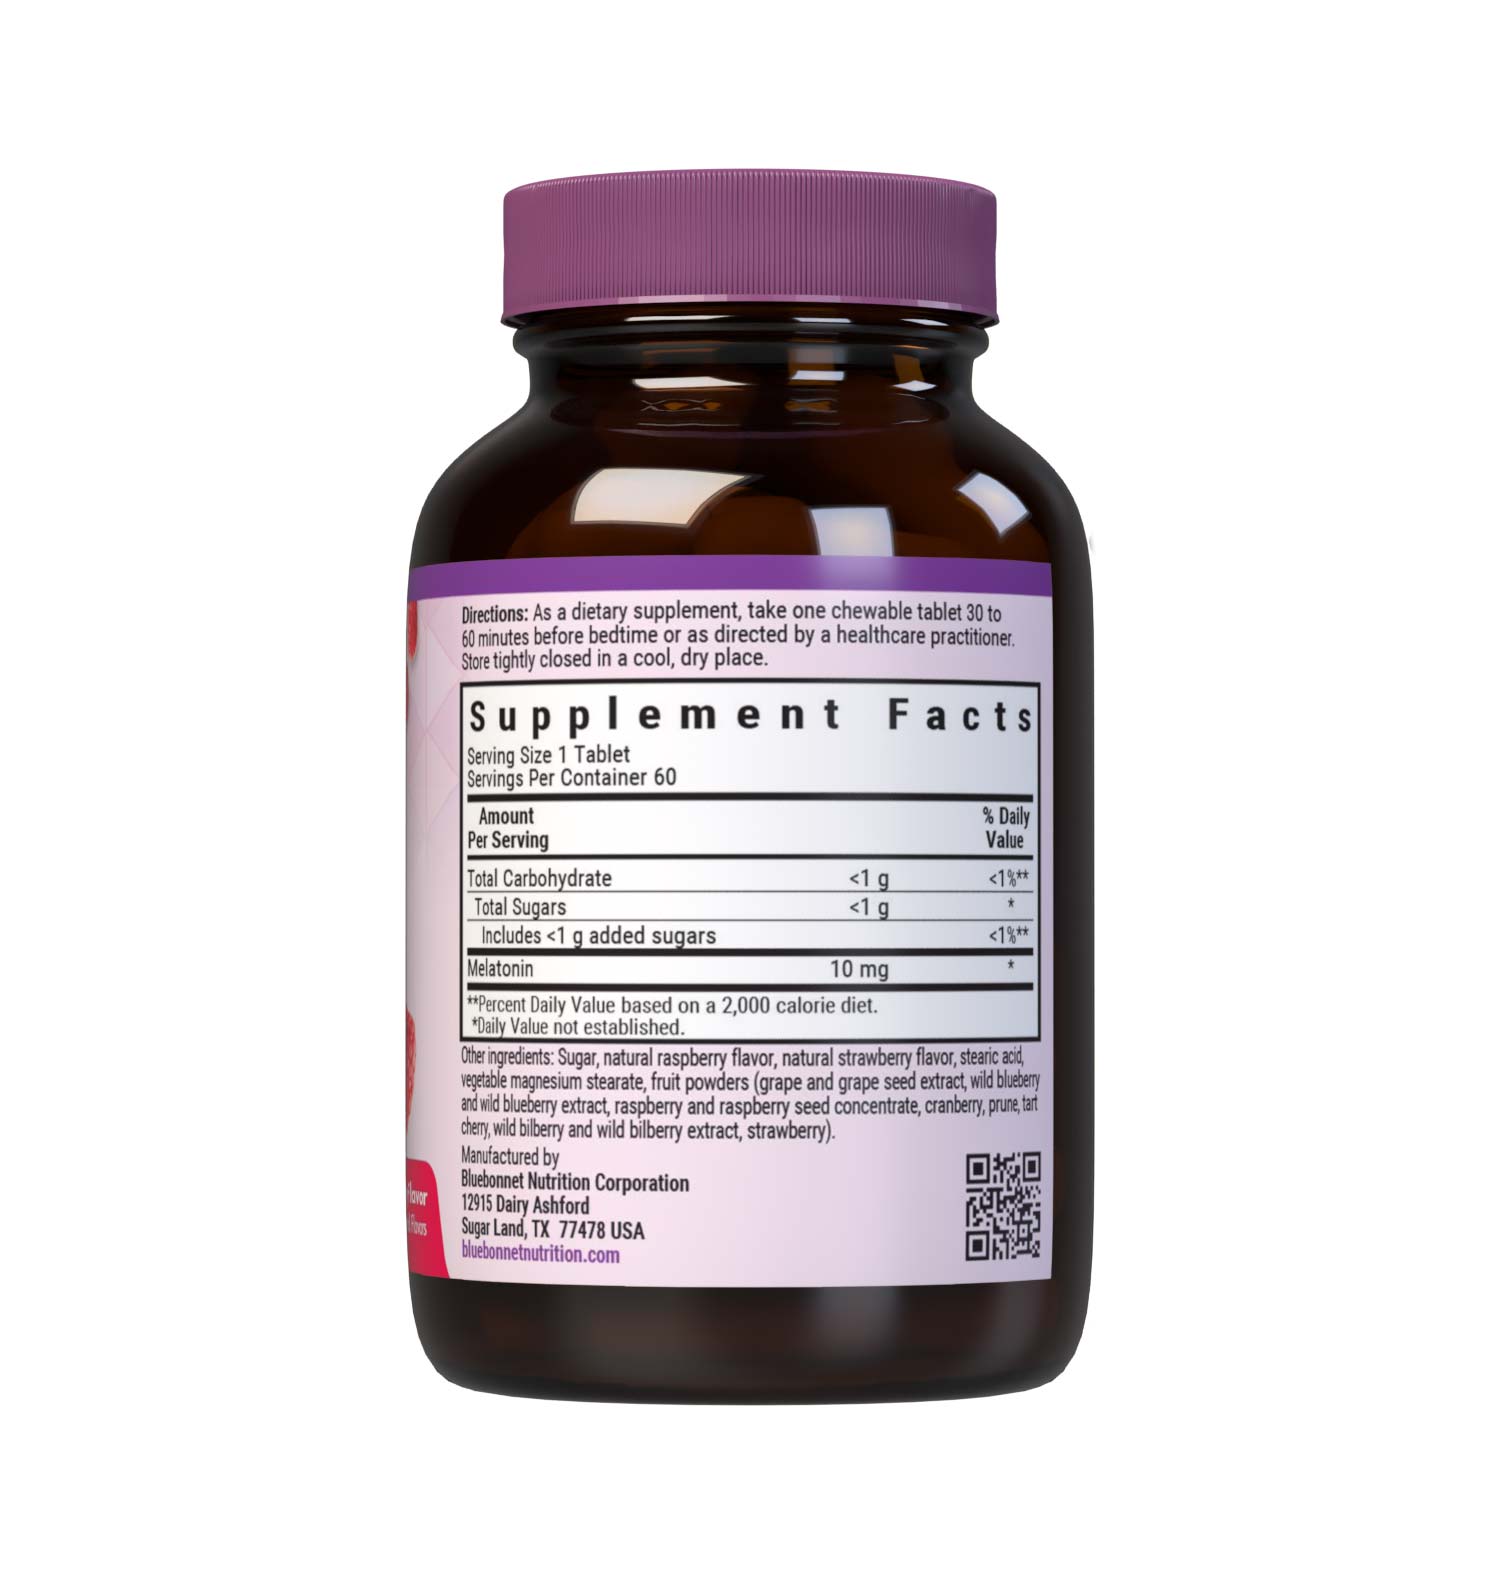 Bluebonnet’s EarthSweet Chewables Melatonin 10 mg 60 Tablets help minimize occasional sleeplessness for those affected by disturbed sleep/wake cycles, such as those traveling across multiple time zones. This product is sweetened with EarthSweet, a proprietary mix of fruit powders and sugar cane crystals. Supplement facts panel. #size_60 count